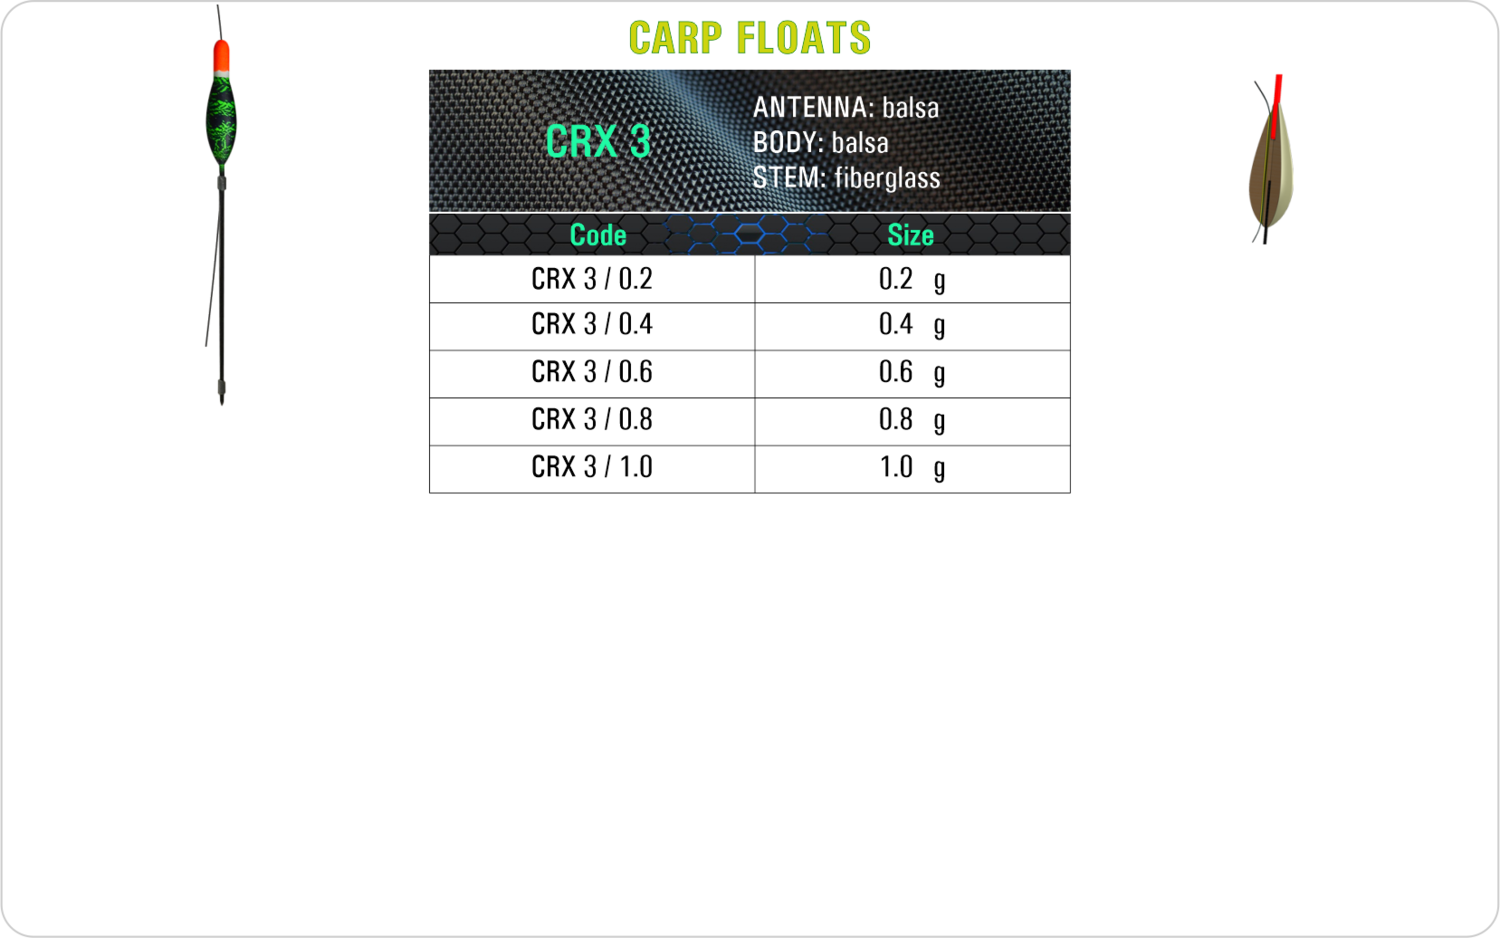 SF CRX 3 Carp float model and table containing an additional information about this float with different codes, sizes, types of the body, the stem and the antenna of the float.